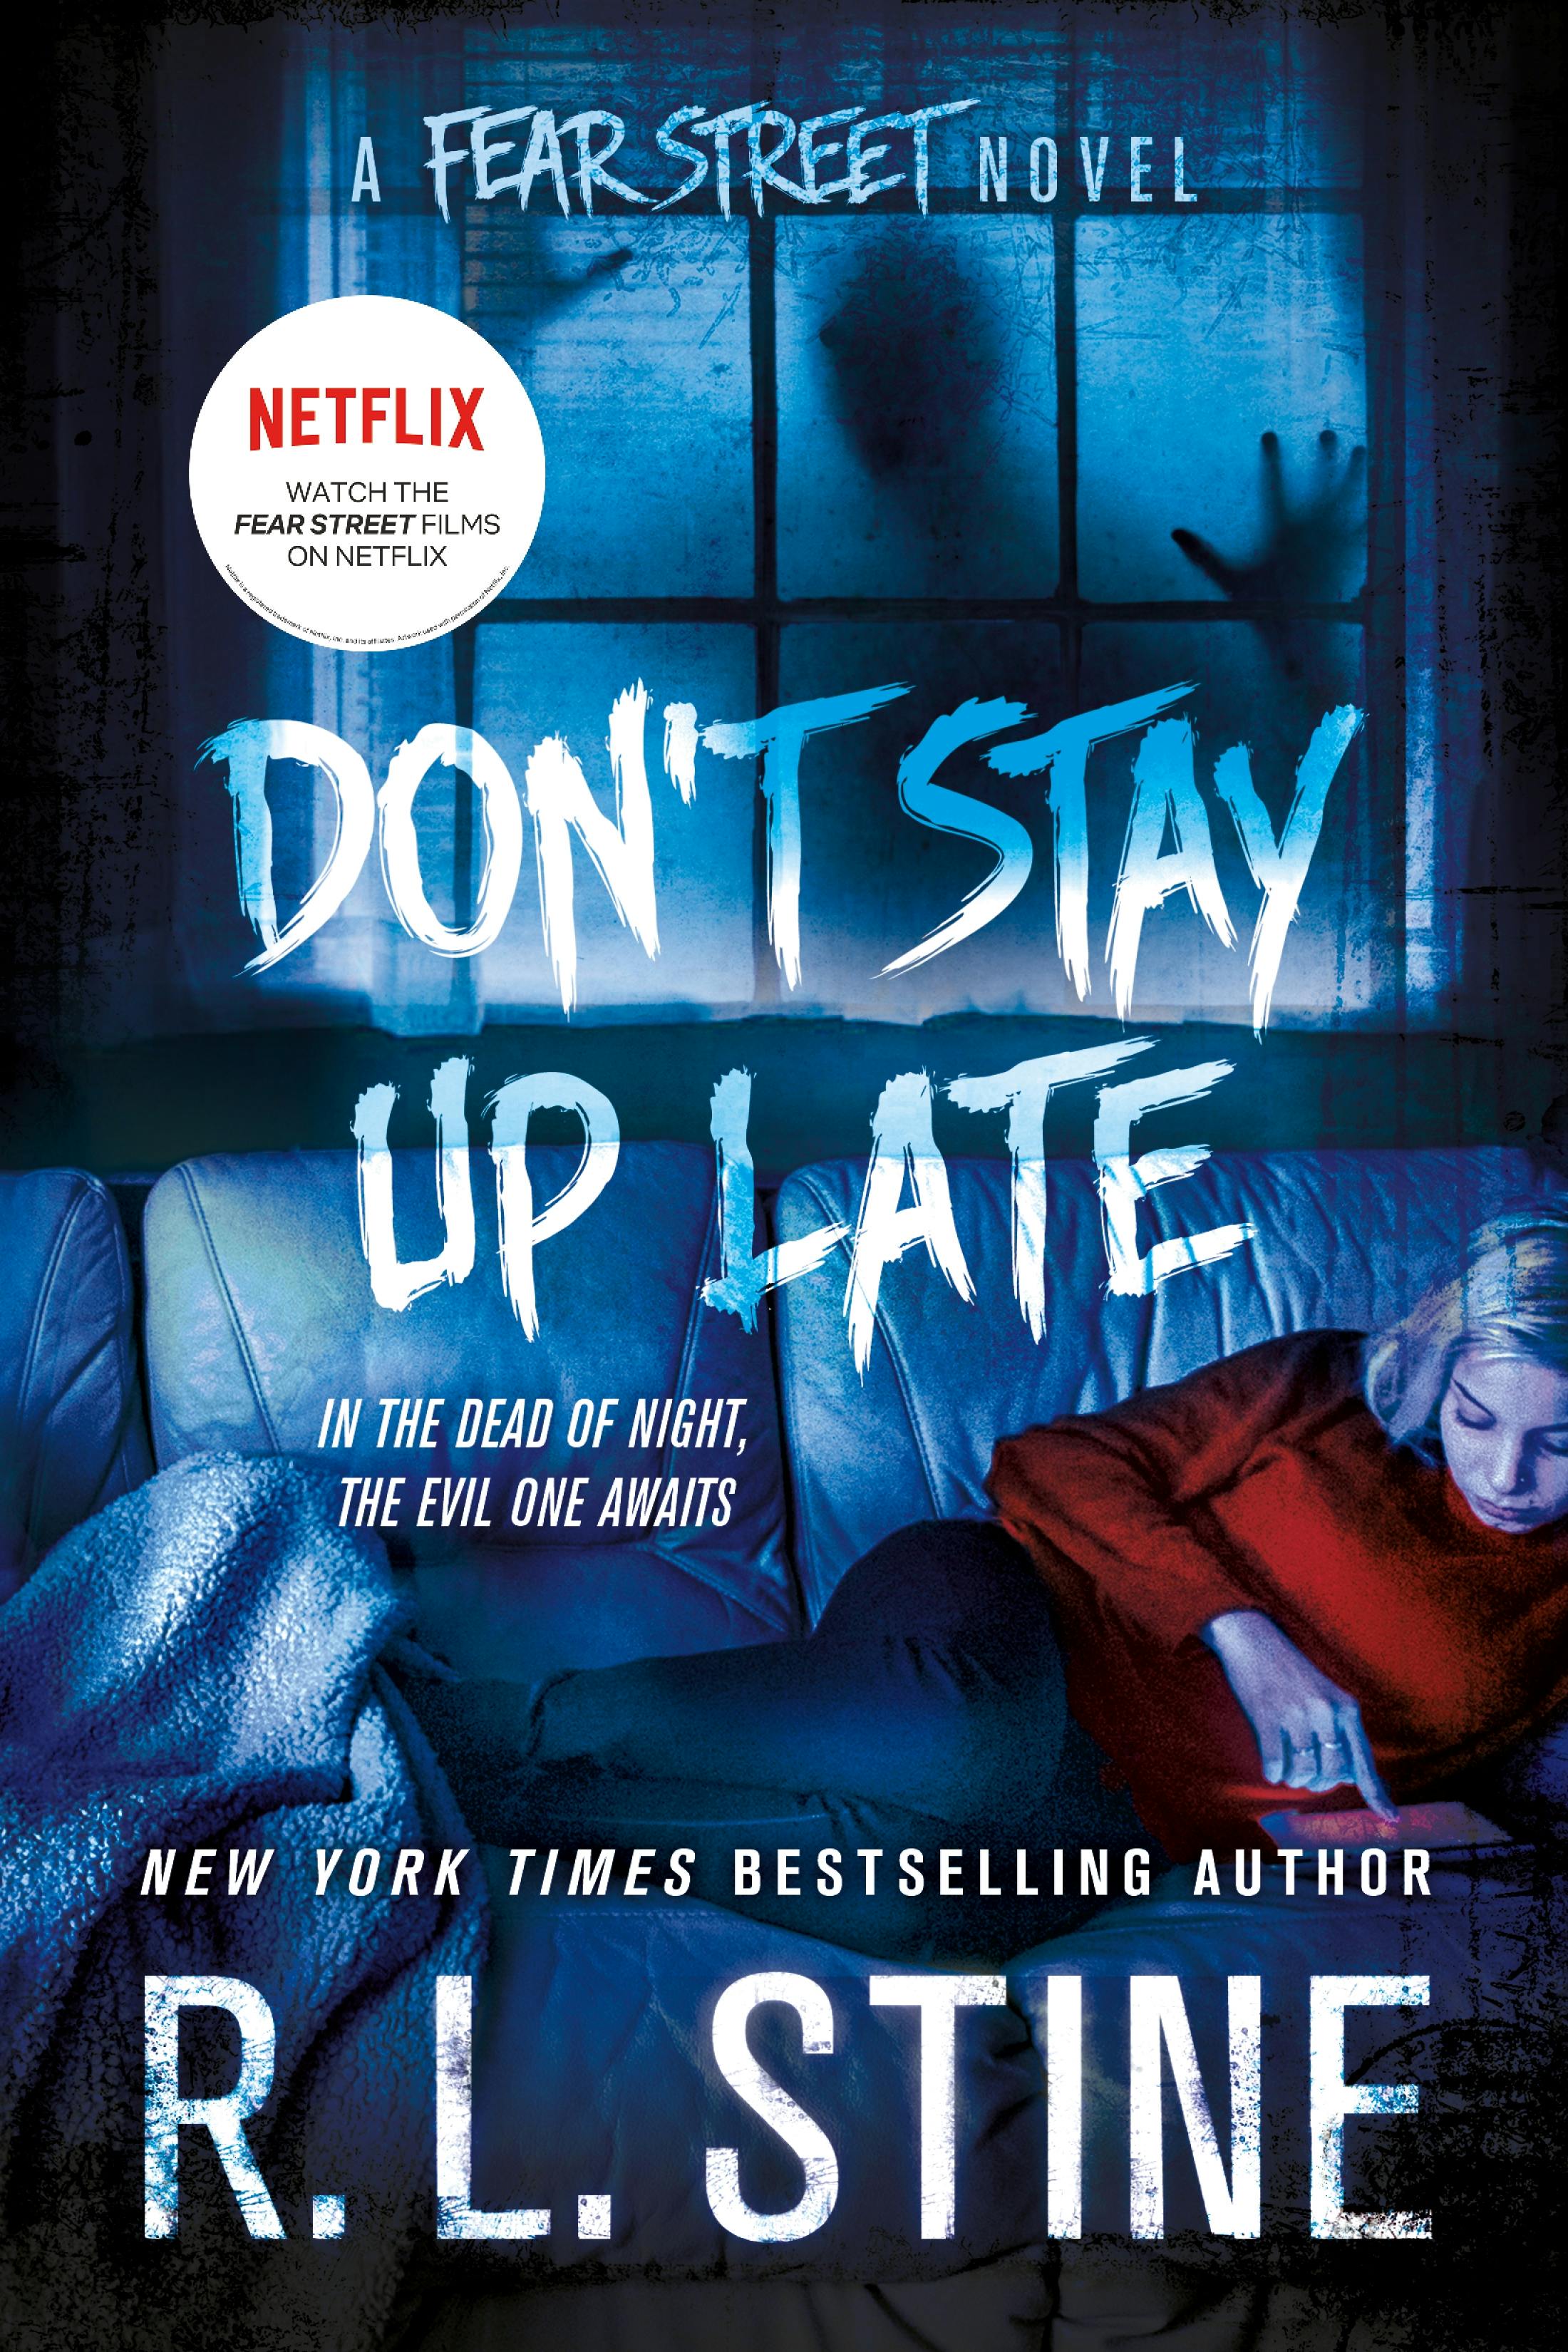 Image of Don't Stay Up Late